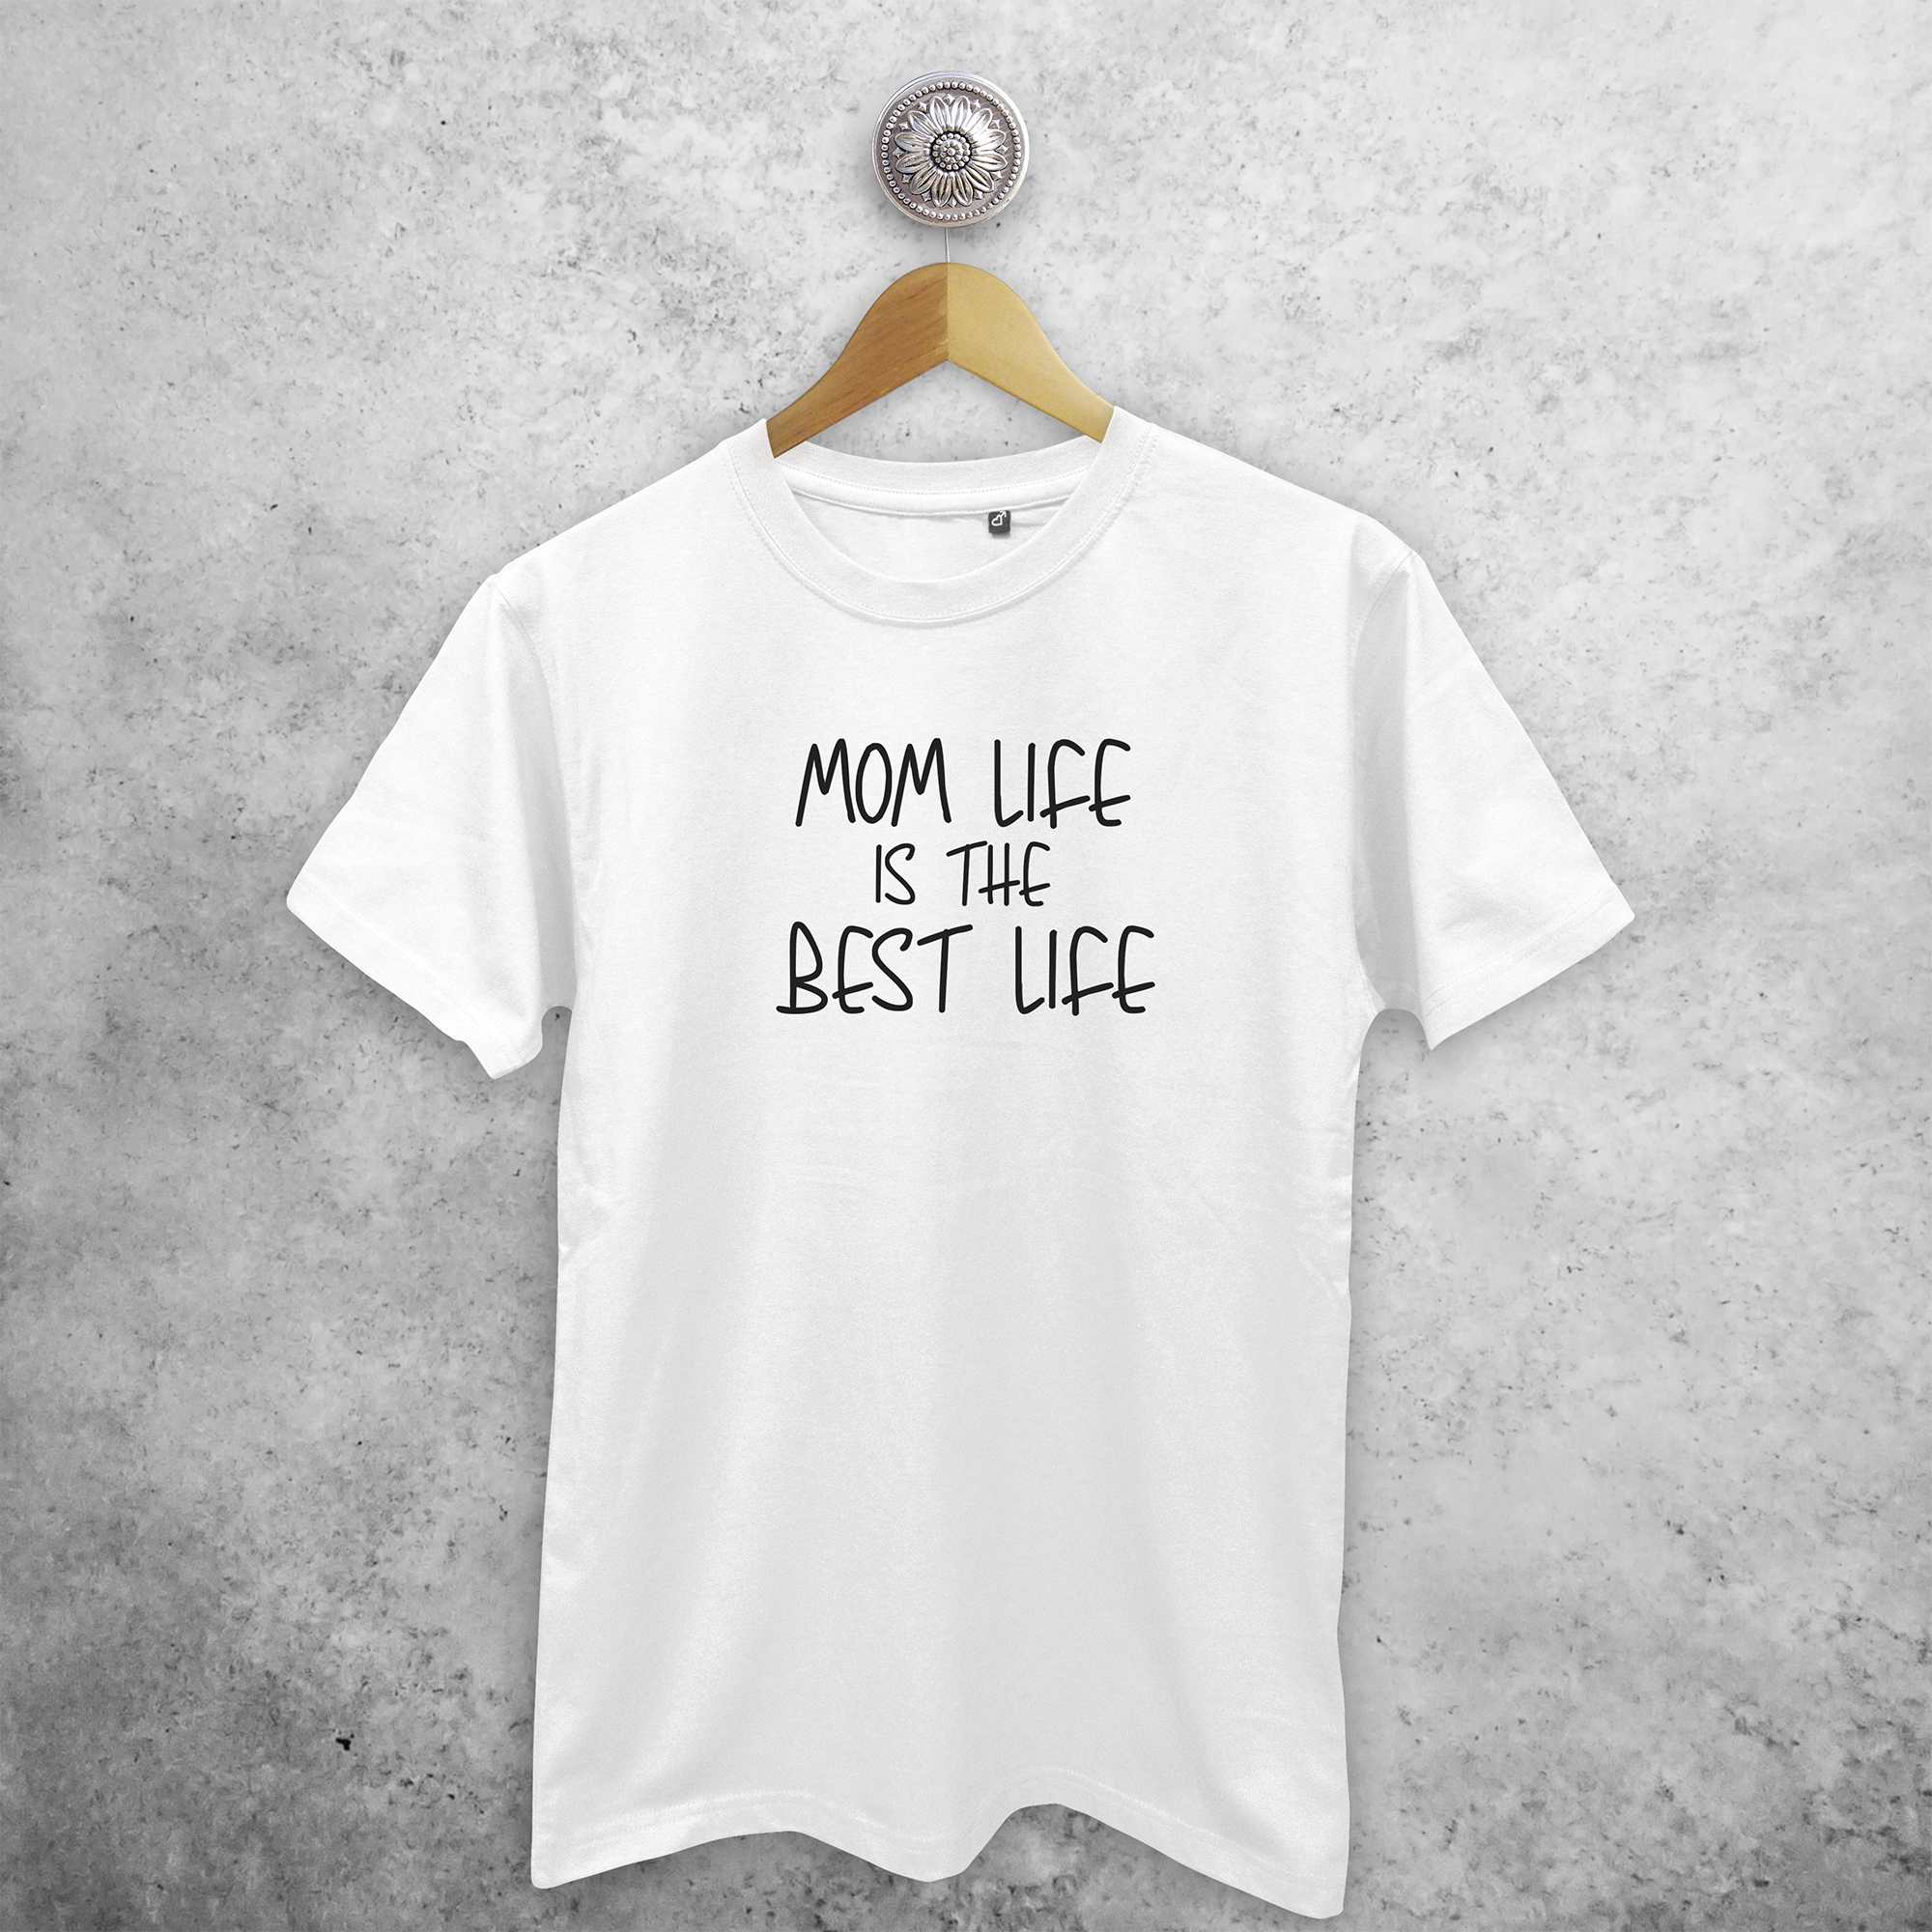 'Mom life is the best life' adult shirt